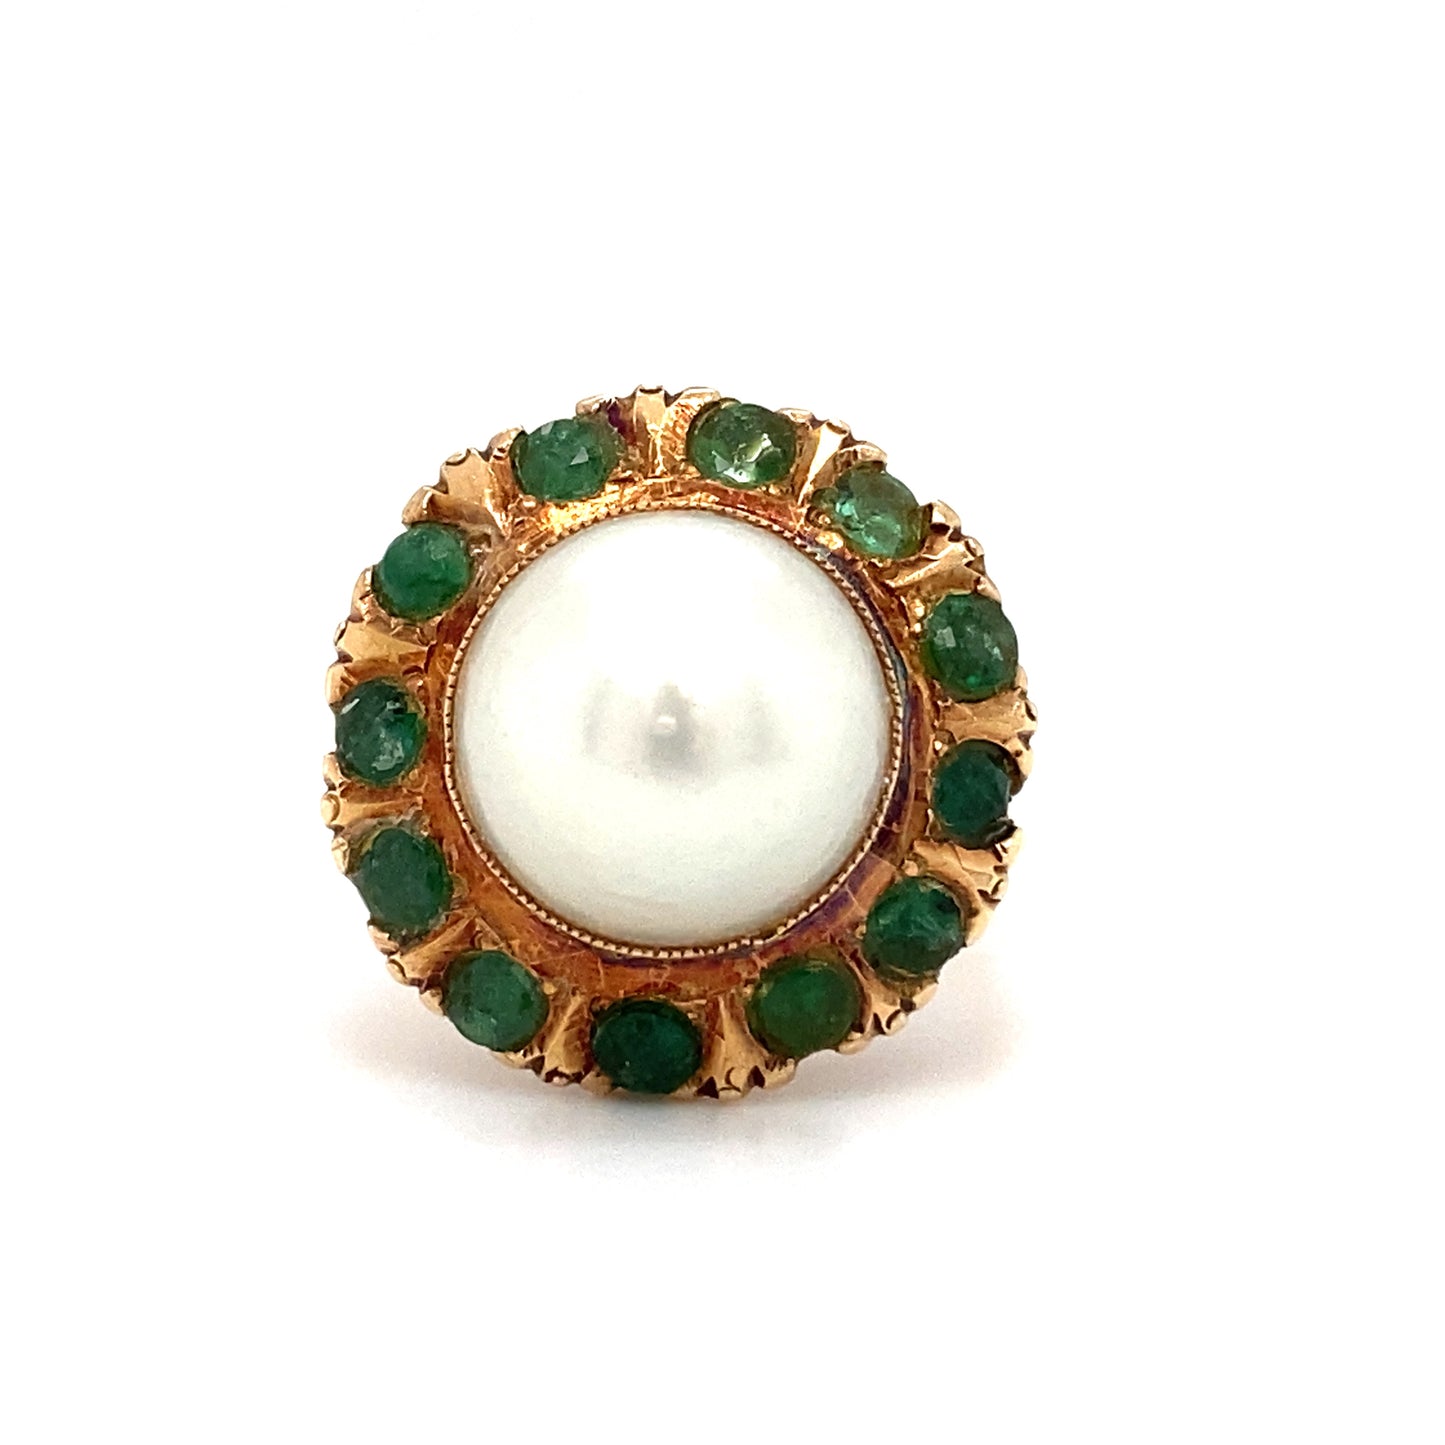 Circa 1890s Victorian Pearl and Emerald Cocktail Ring in 18K Gold